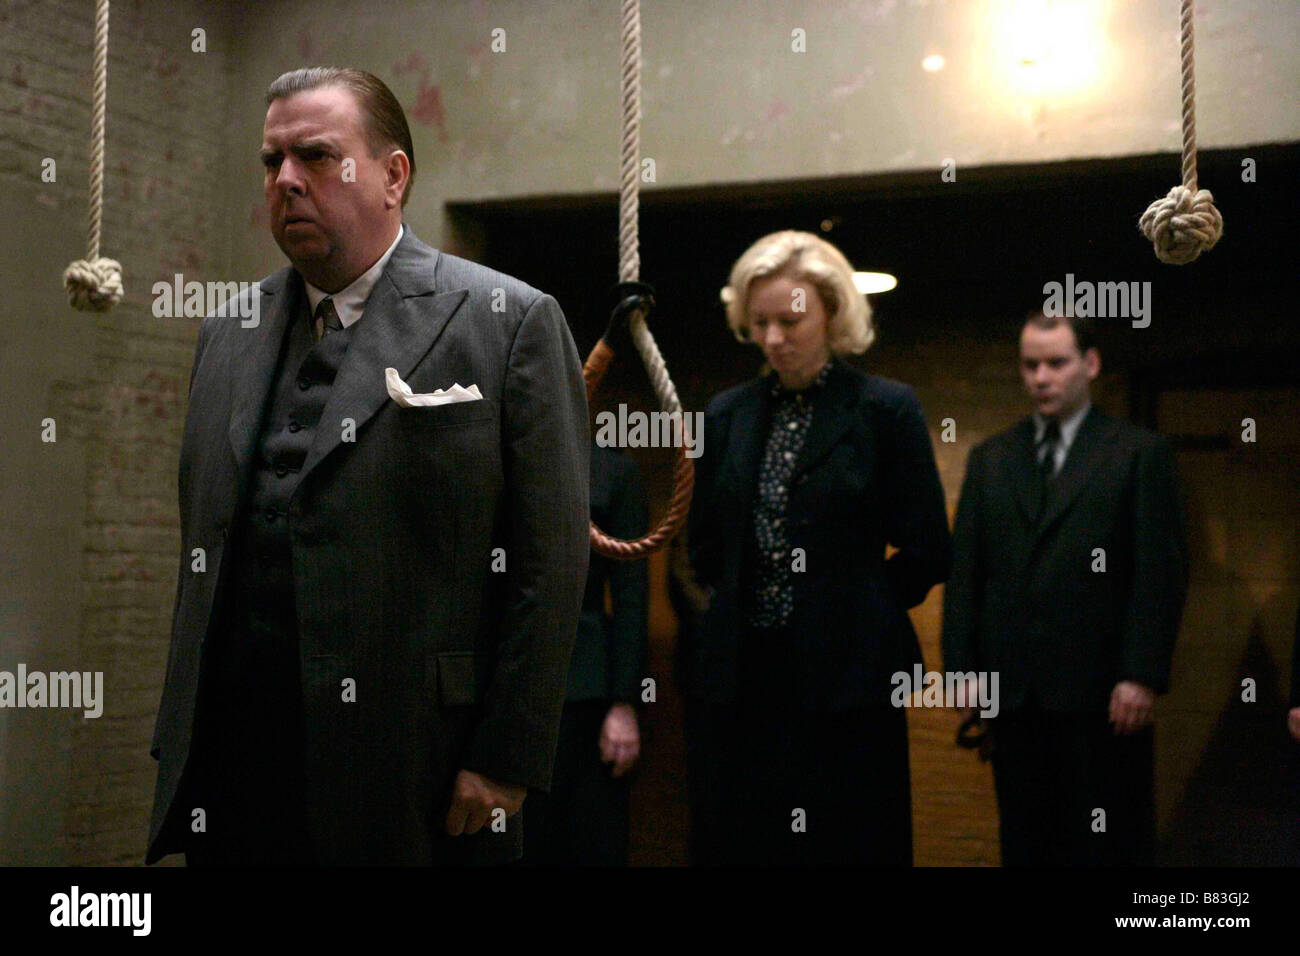 The Last Hangman (USA title) Pierrepoint (2005) UK Timothy Spall, Mary Stockley  Director: Adrian Shergold Stock Photo